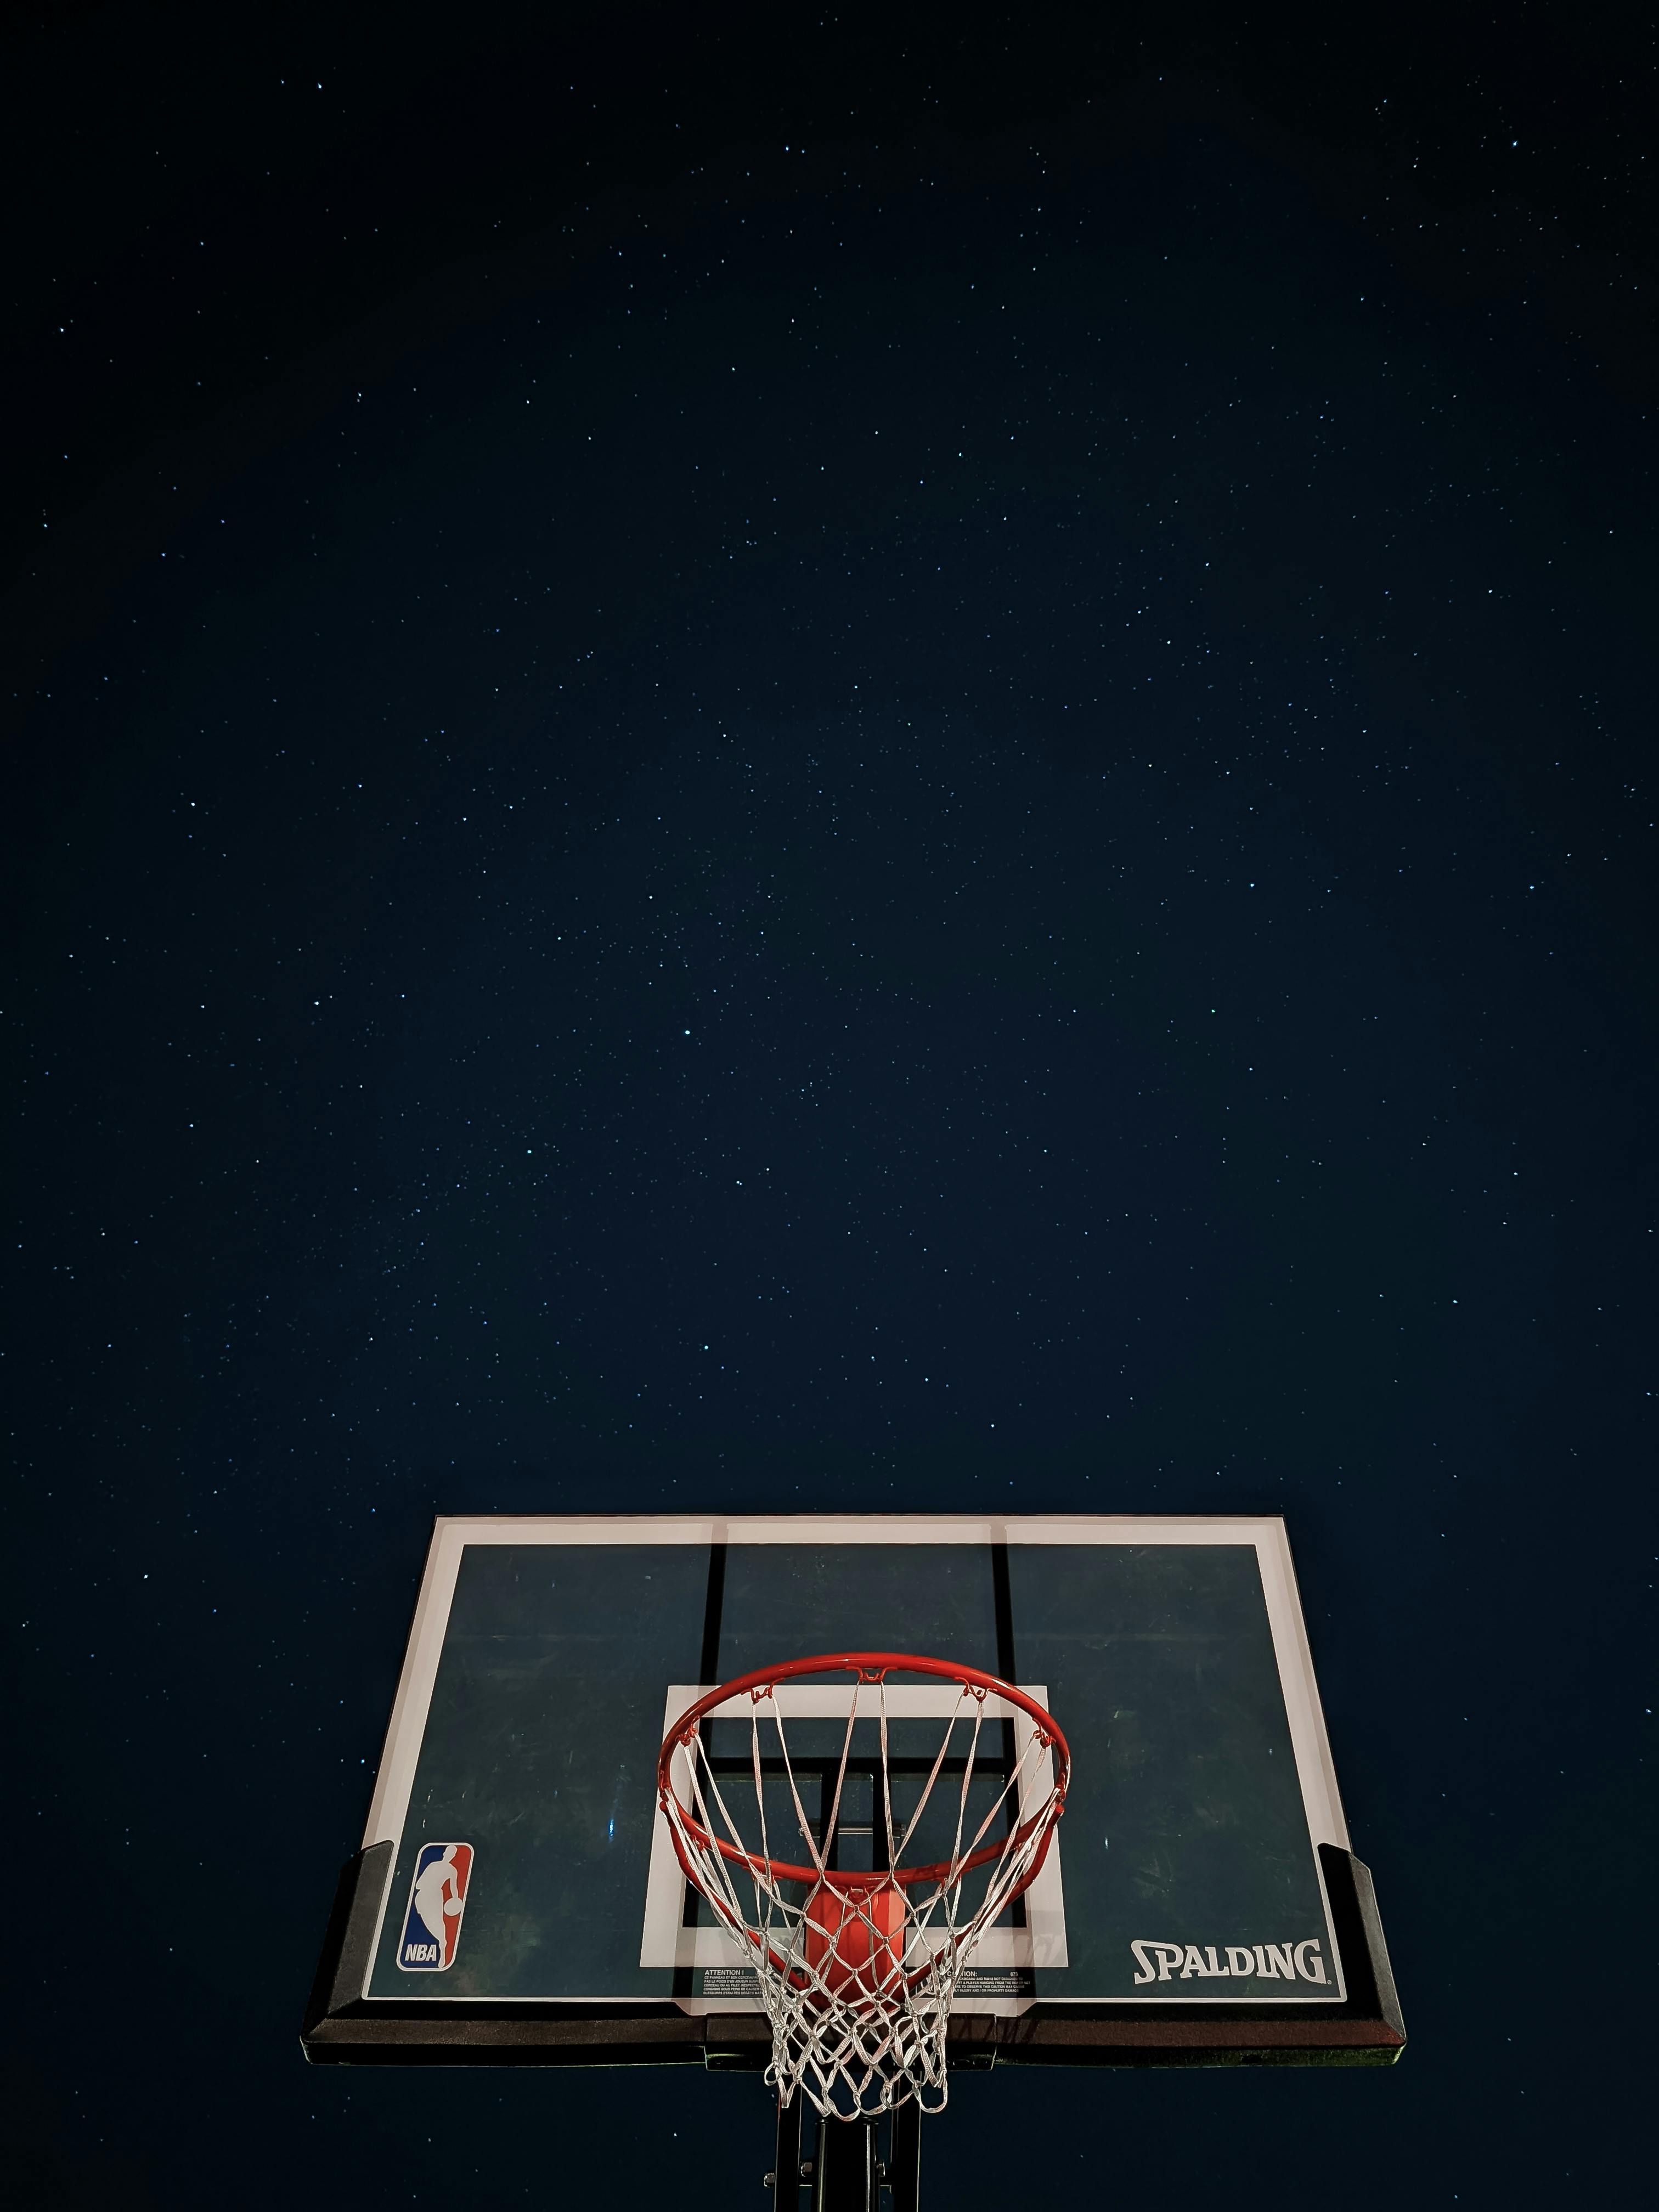 Basketball Court Photos, Download Free